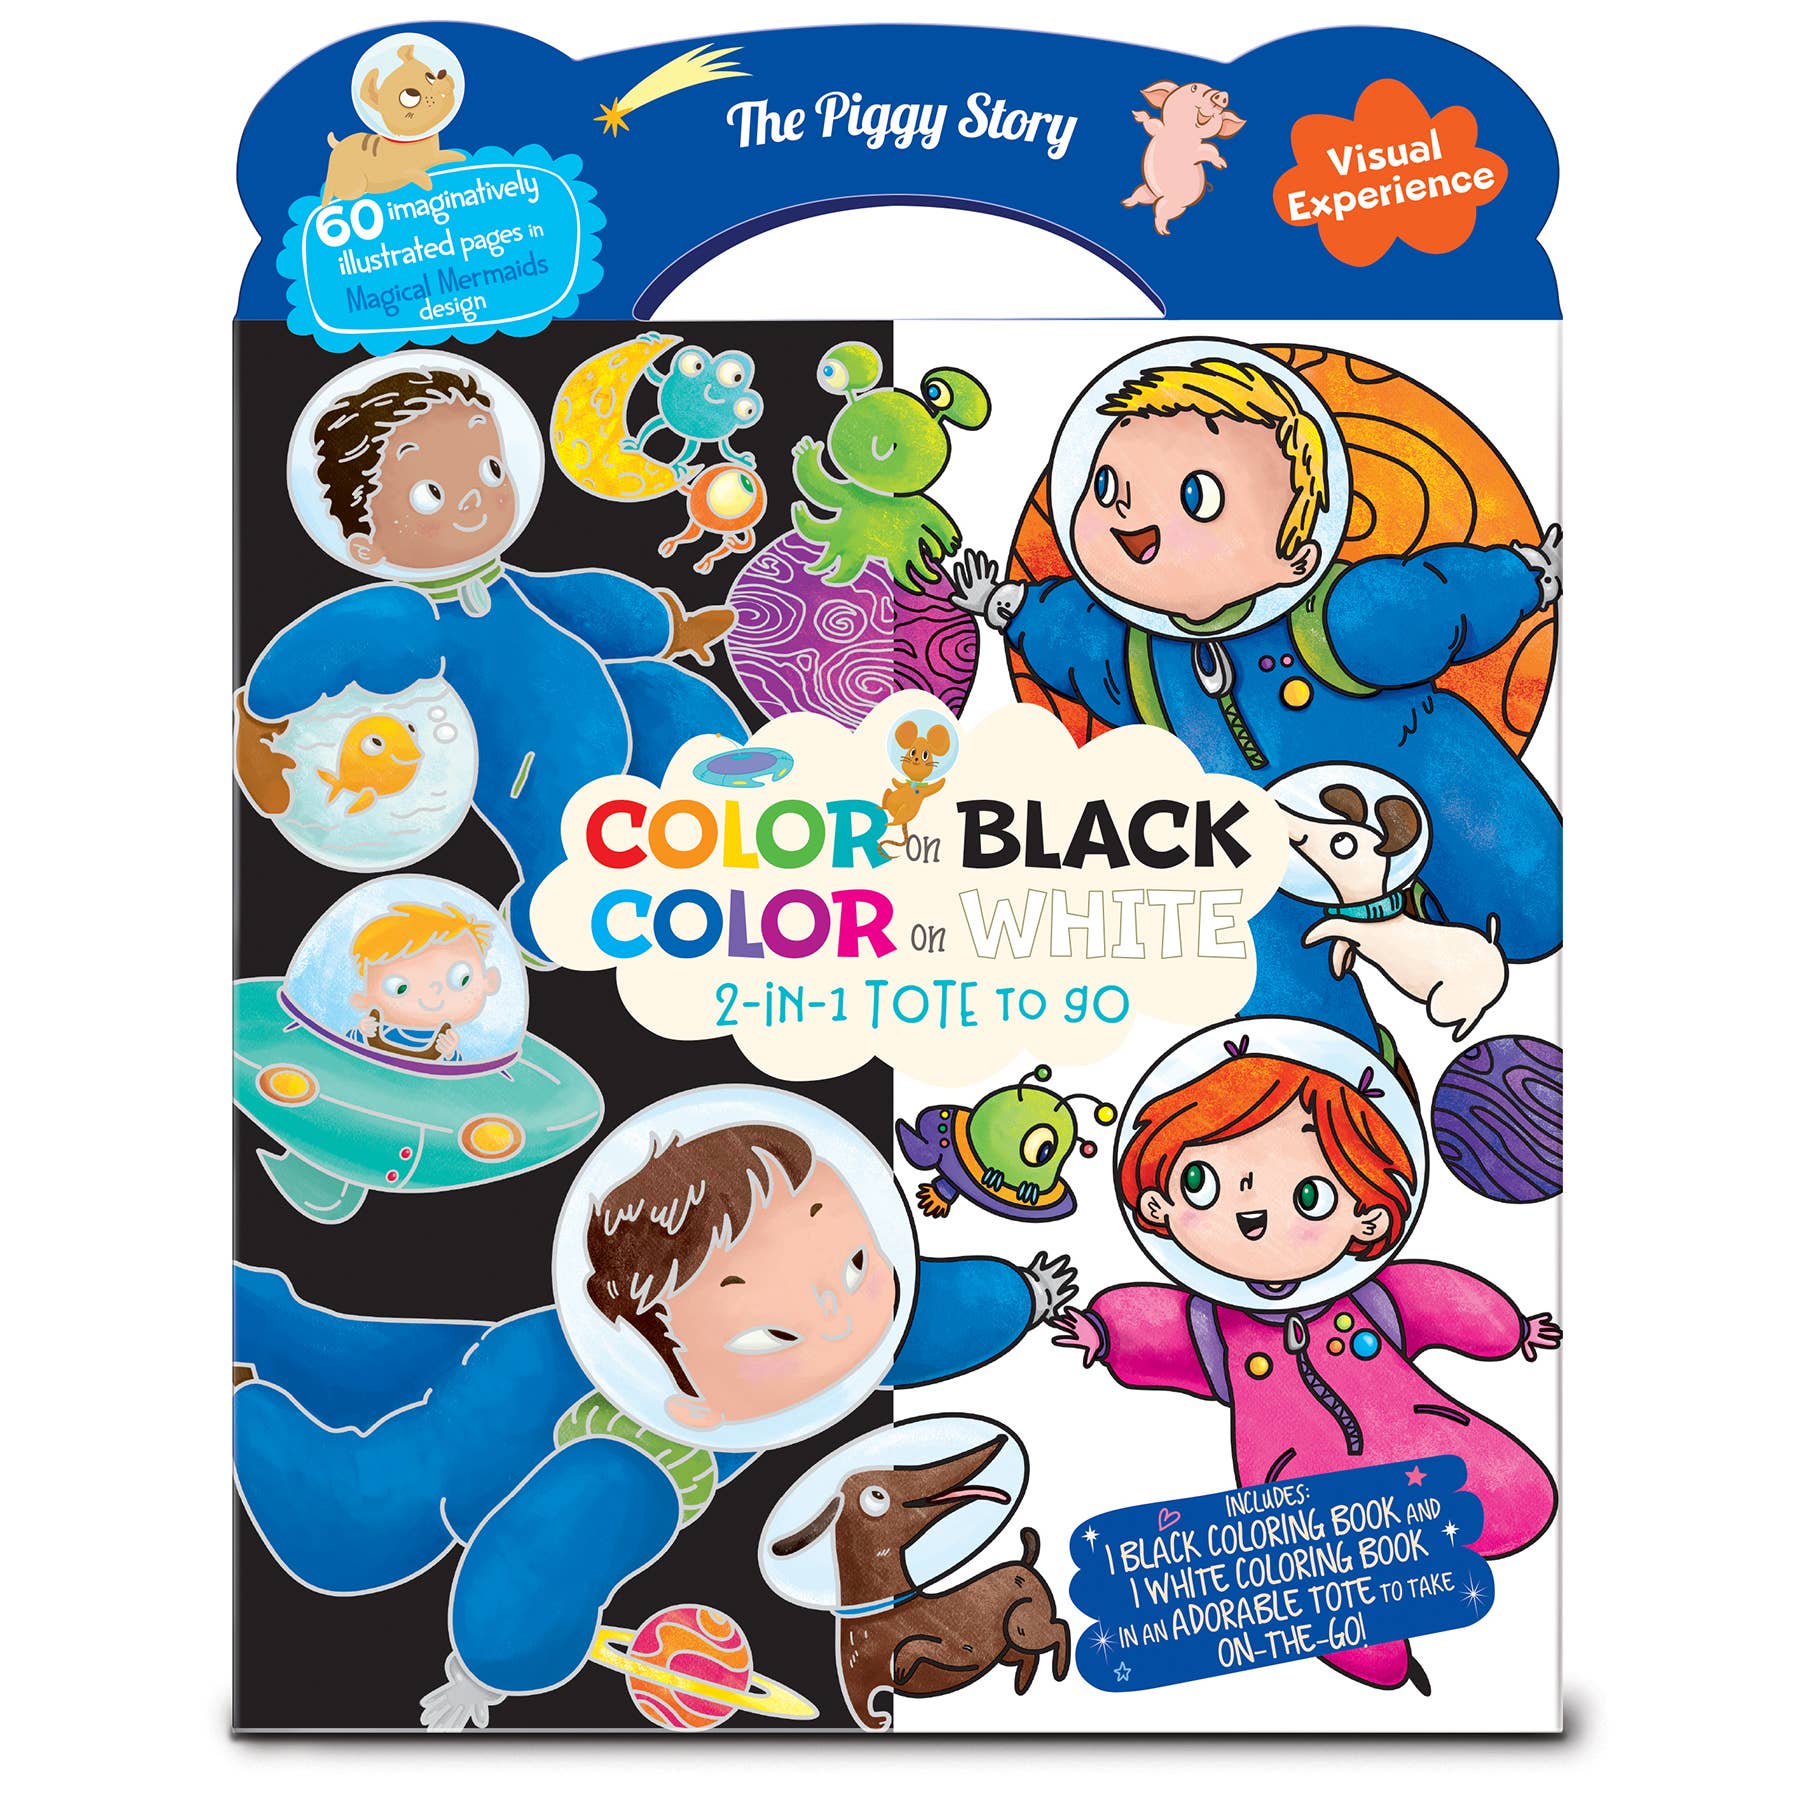 *Color on Black, Color on White 2-in-1 Tote Space Adventure